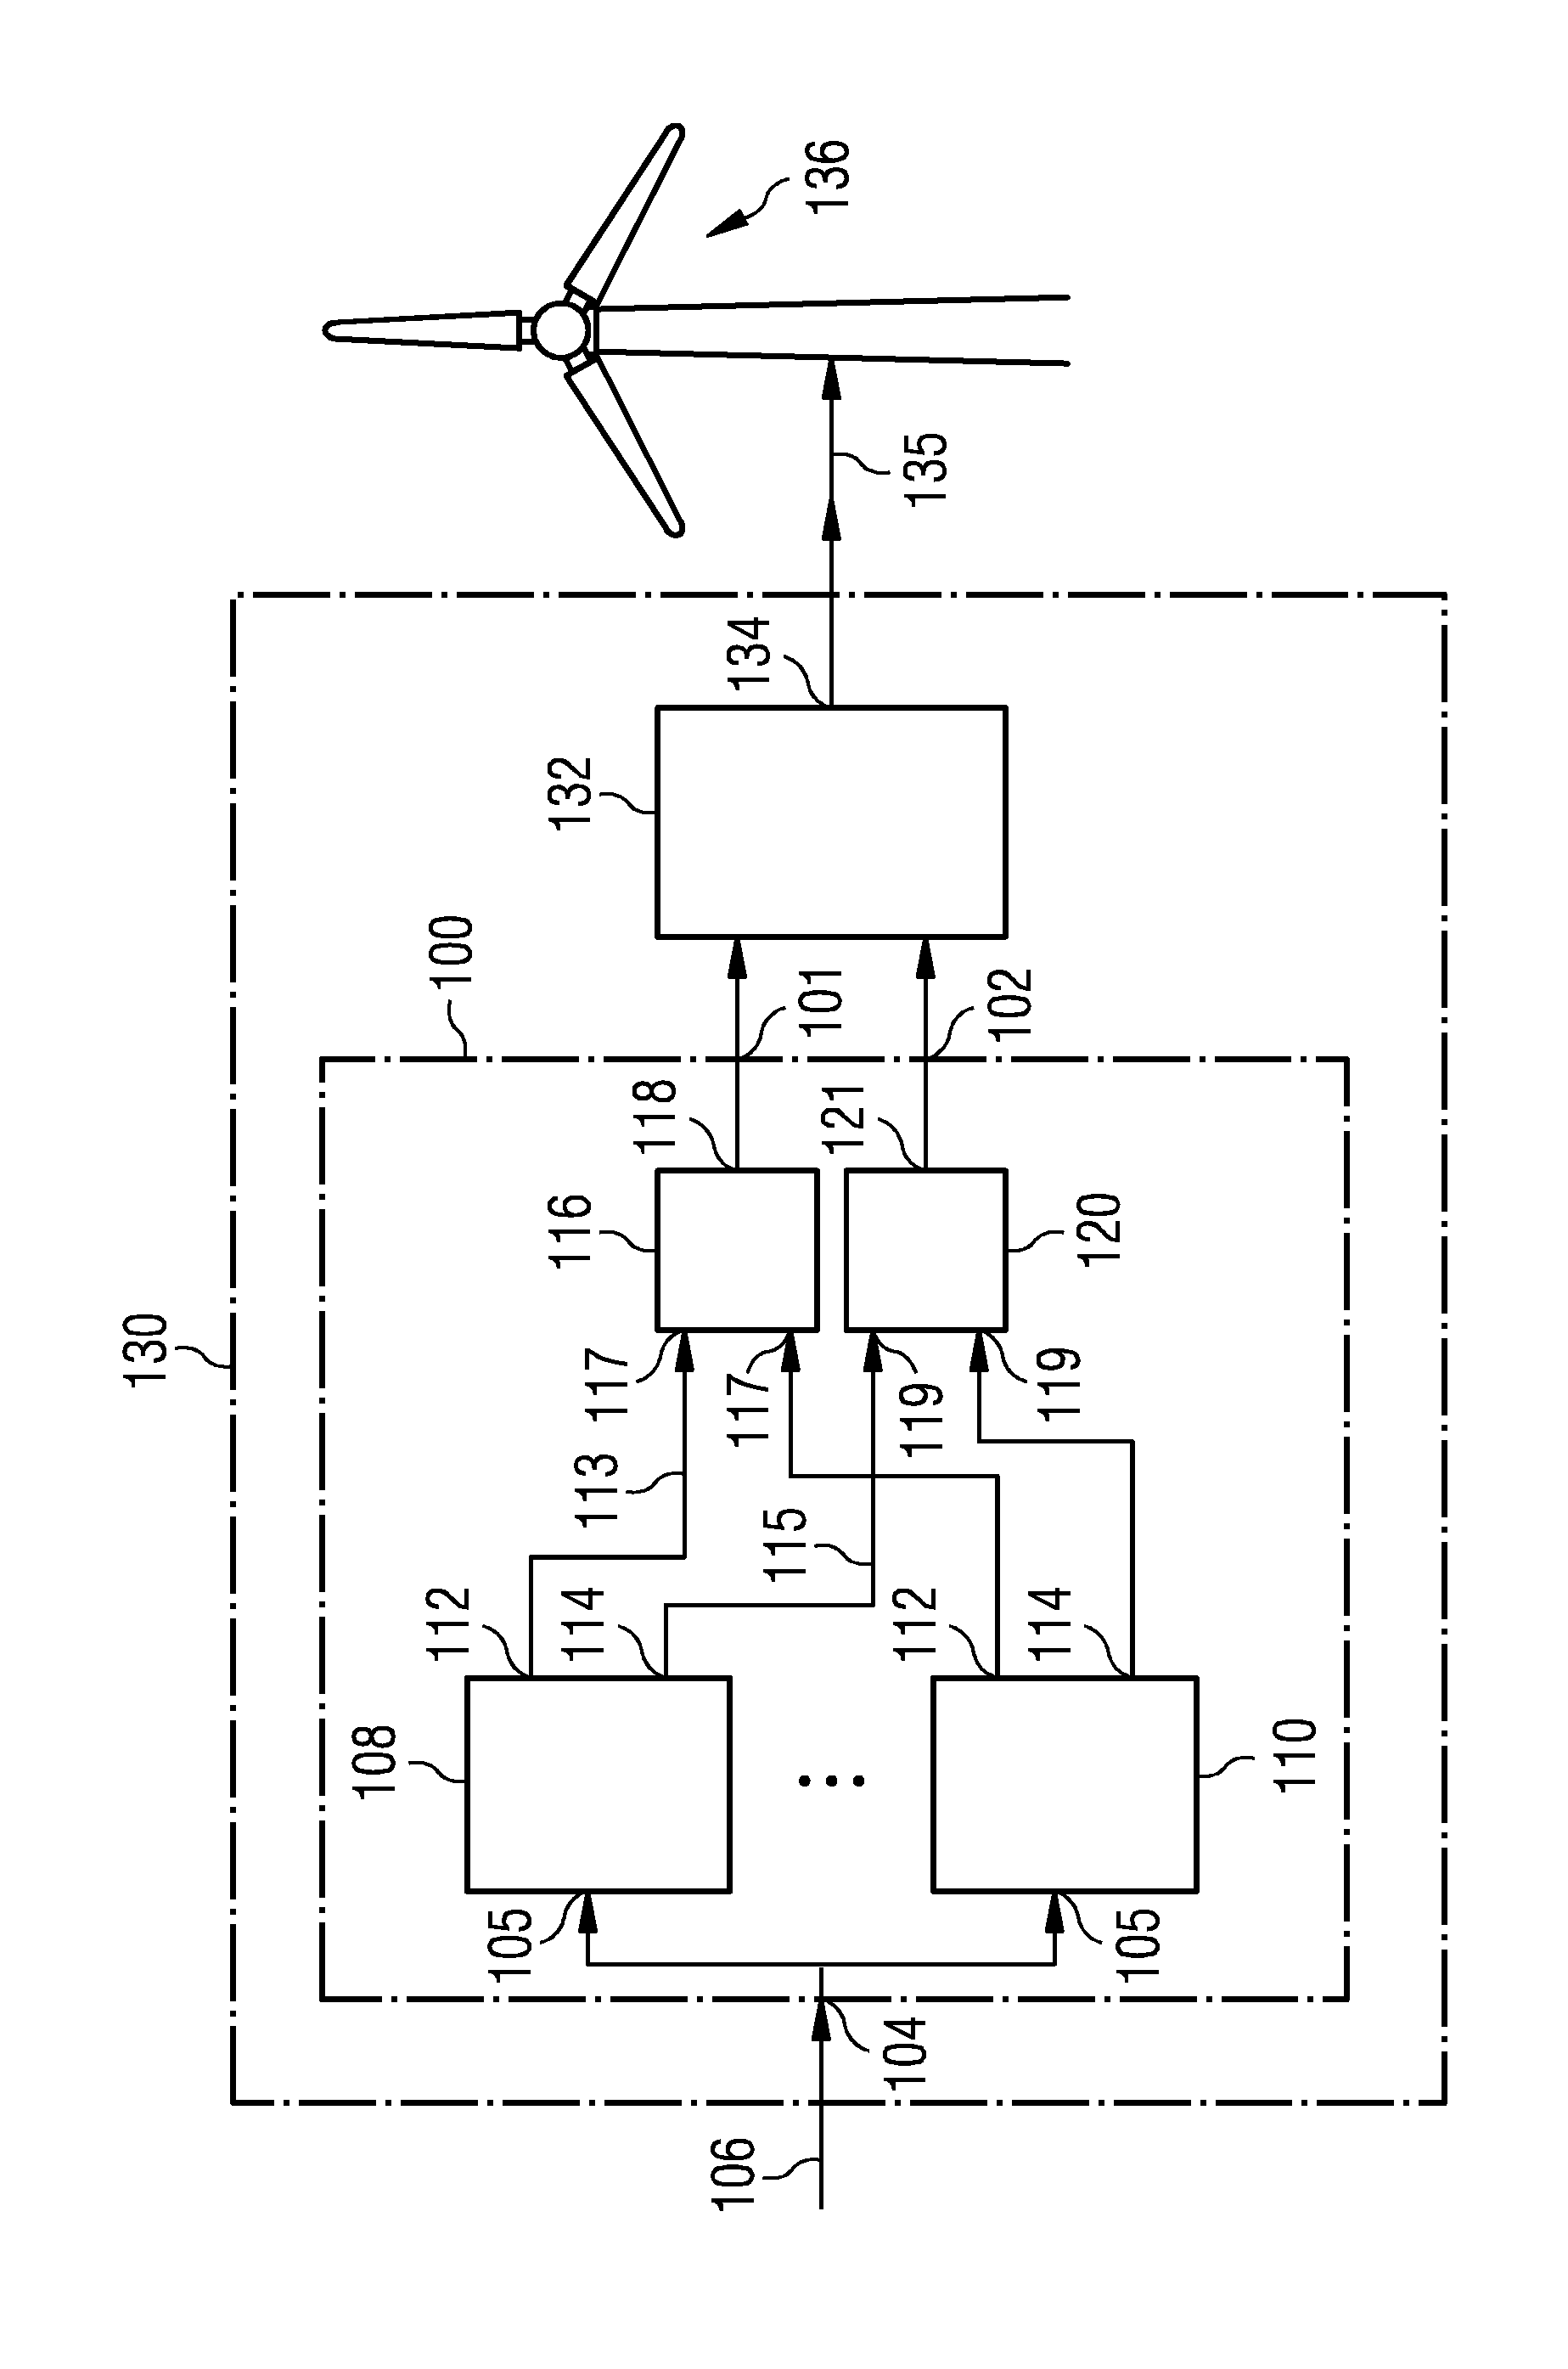 System and method for operating a wind turbine using adaptive reference variables